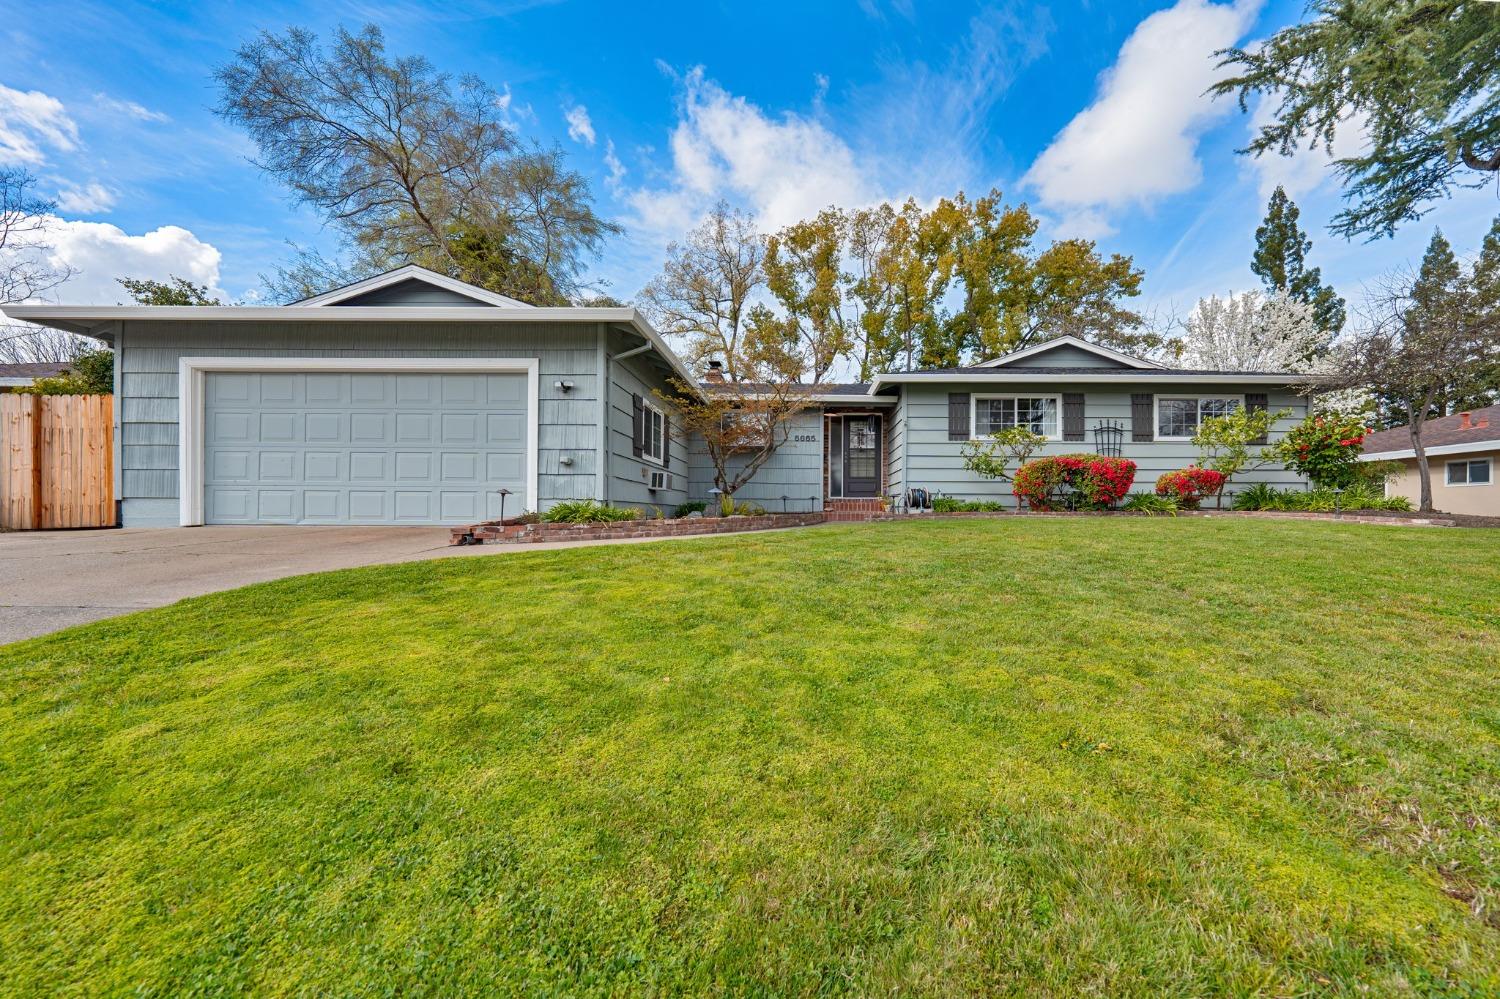 5665 Kingswood Drive, Citrus Heights, CA 95610